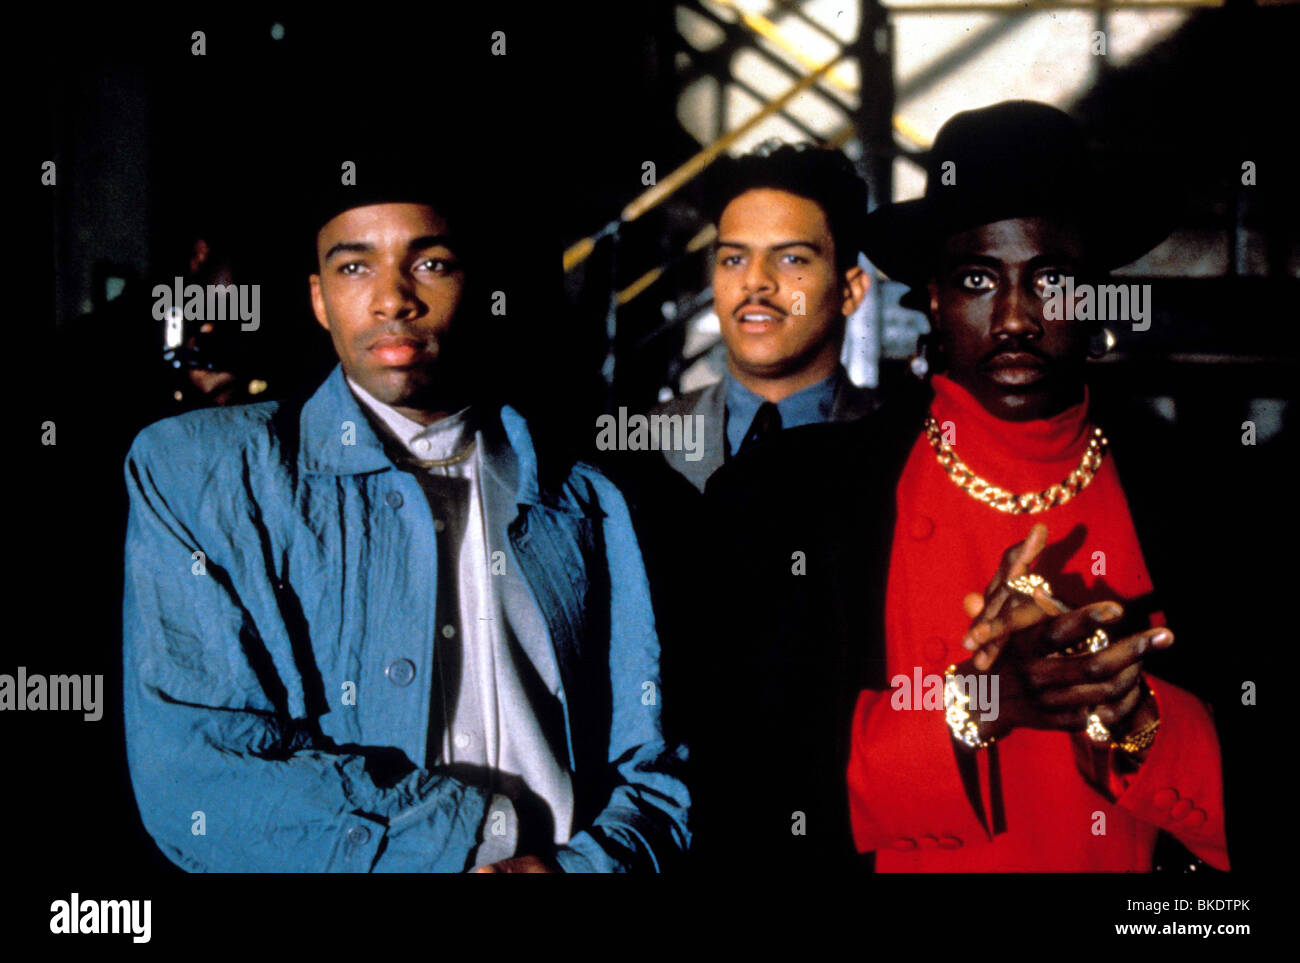 New jack city High Resolution Stock Photography and Images   Alamy 1300x963